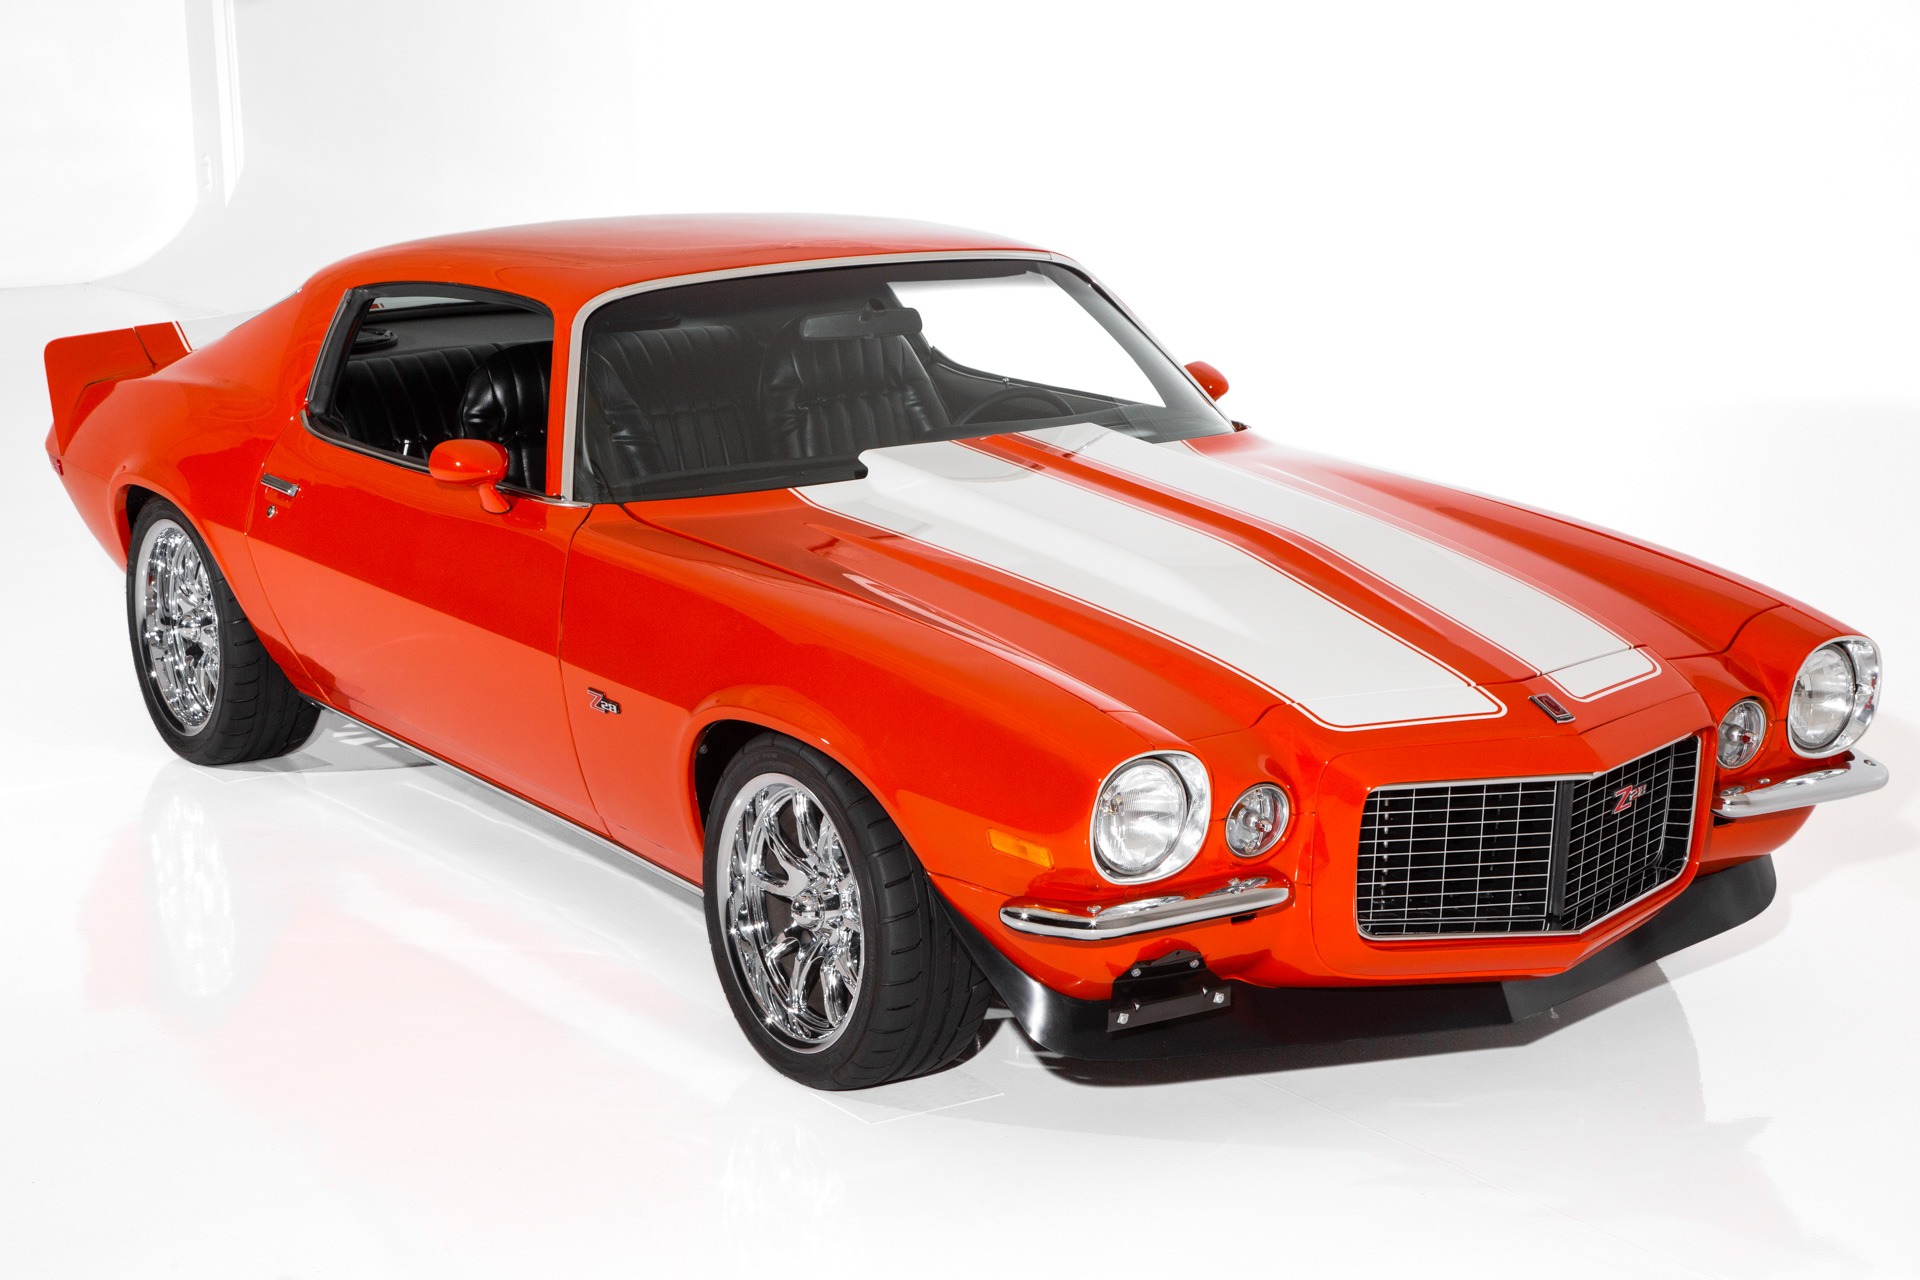 For Sale Used 1972 Chevrolet Camaro Built 383/422hp Stroker | American Dream Machines Des Moines IA 50309